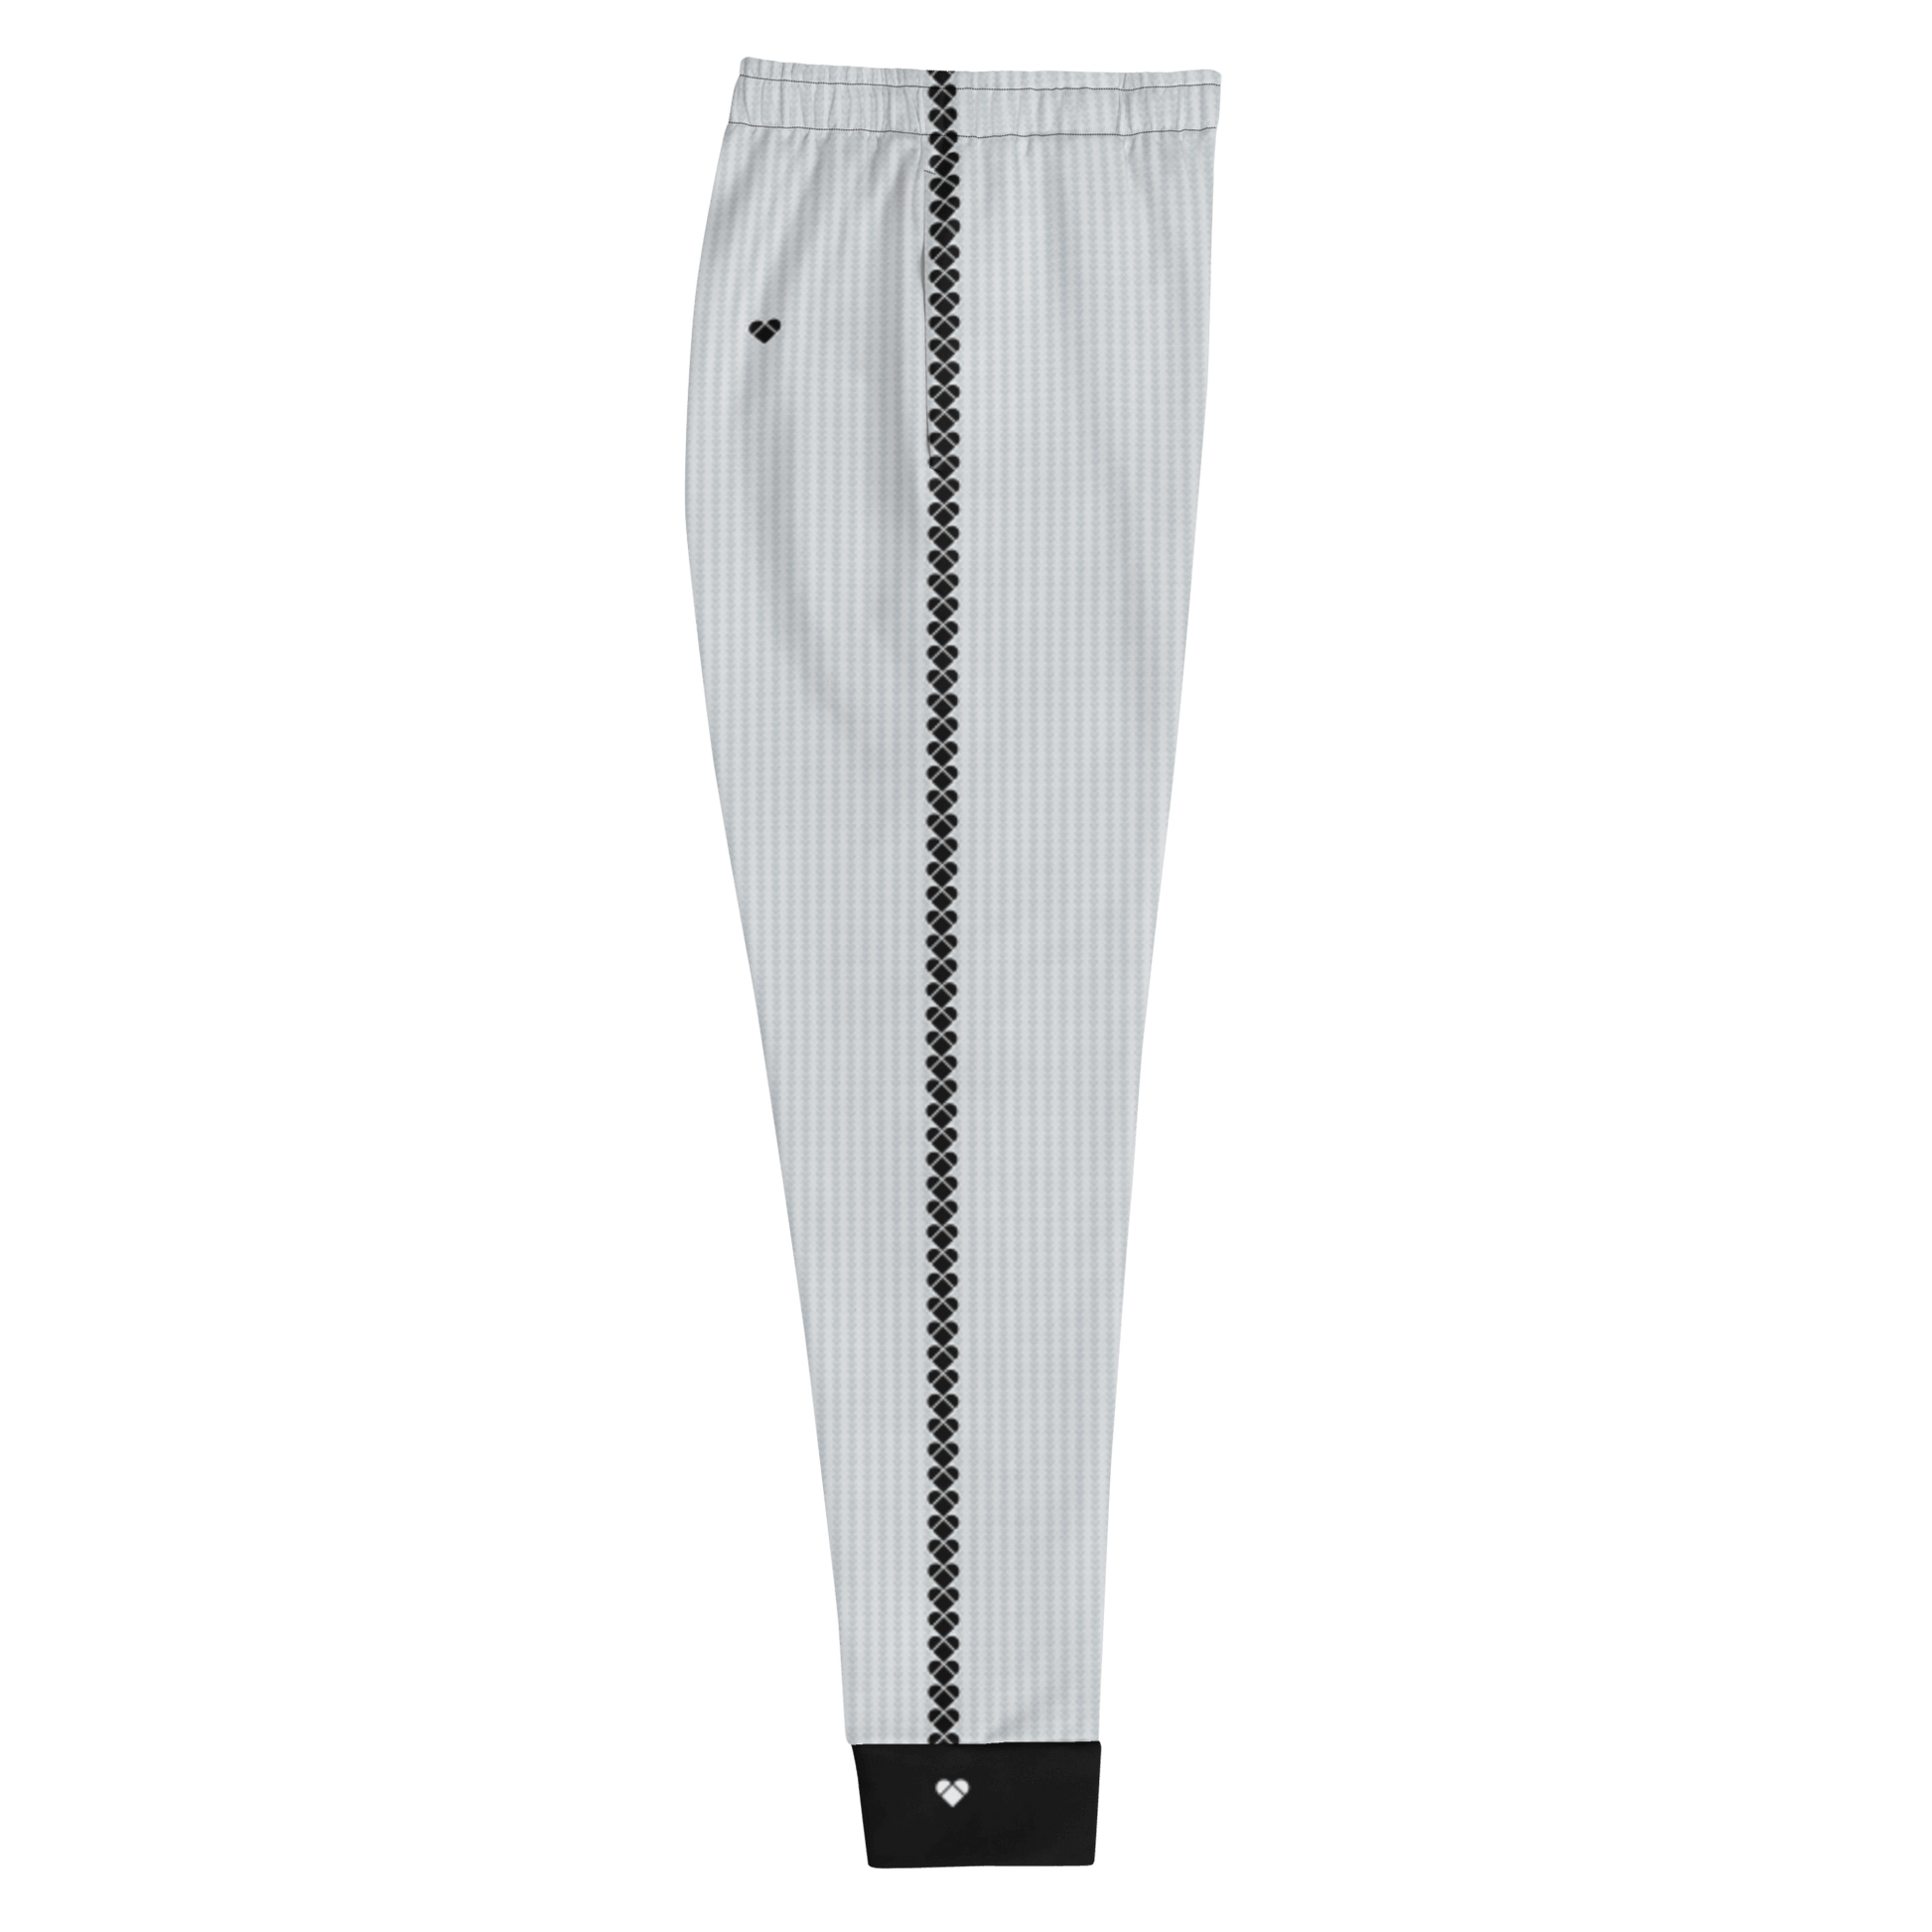 Light gray joggers with a heart-shaped geometric pattern and black details on the leg cuffs for women from CRiZ AMOR's Amor Primero collection, right side